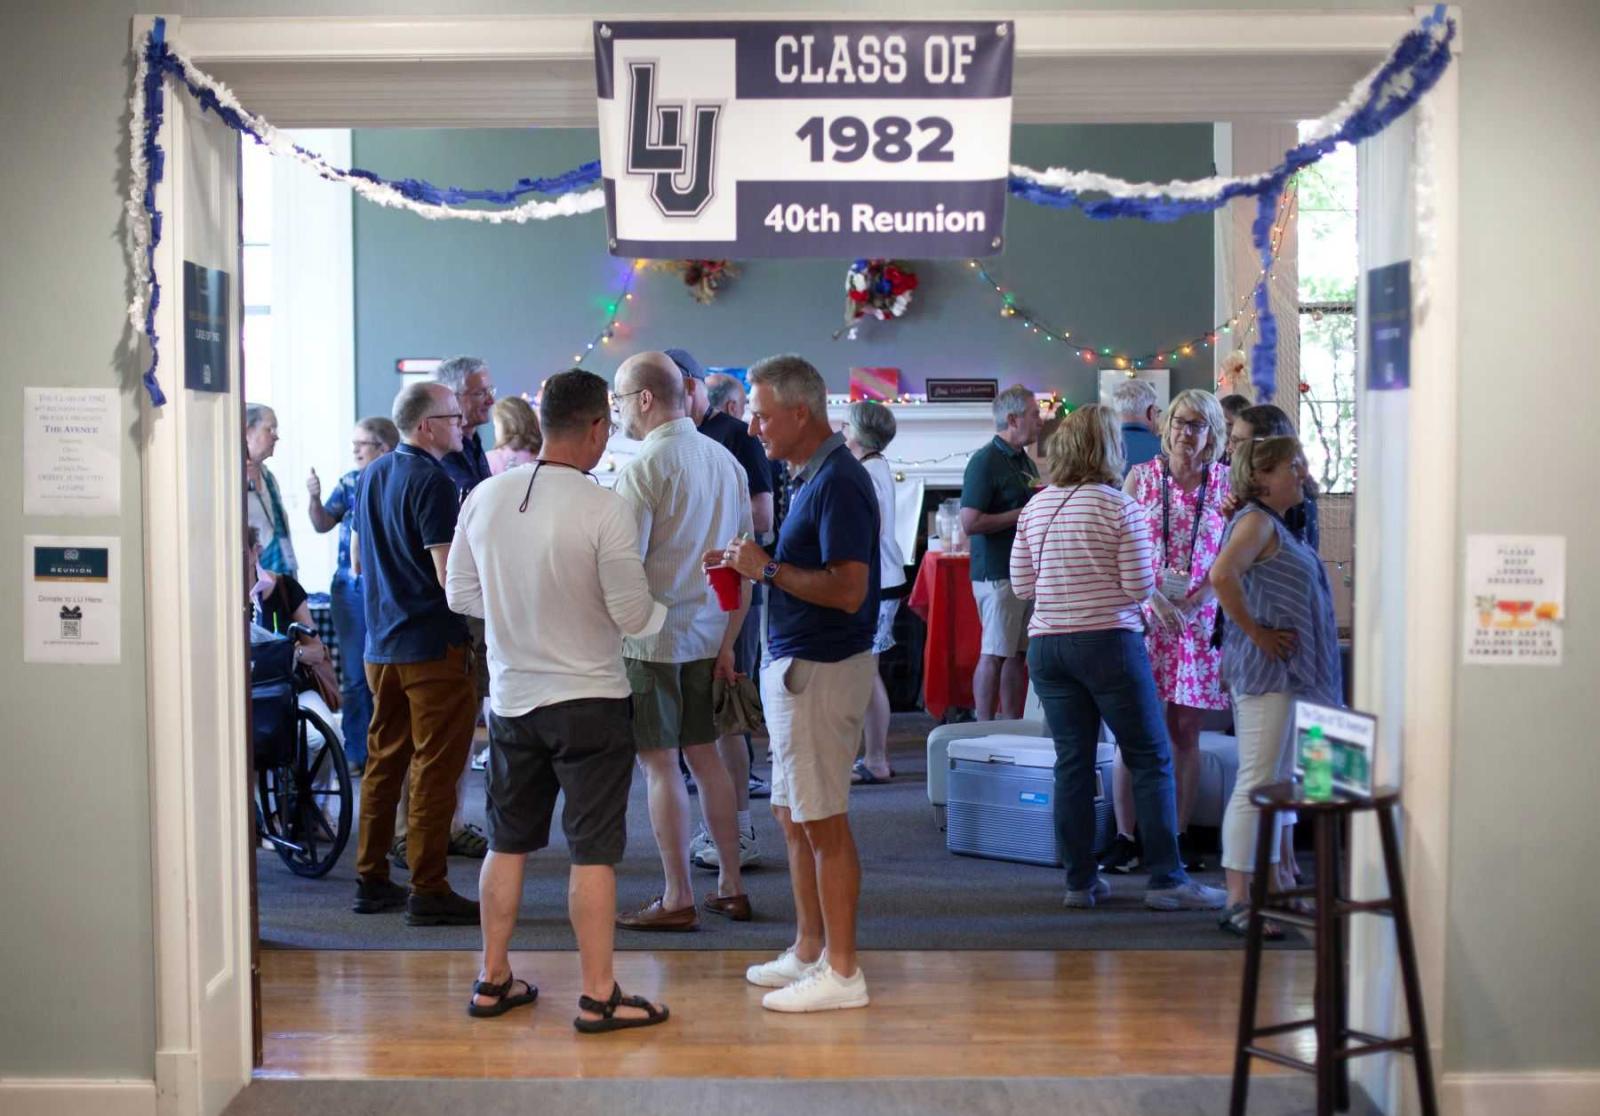 Members of the Class of 1982 socialize in the lobby of Sage Hall.